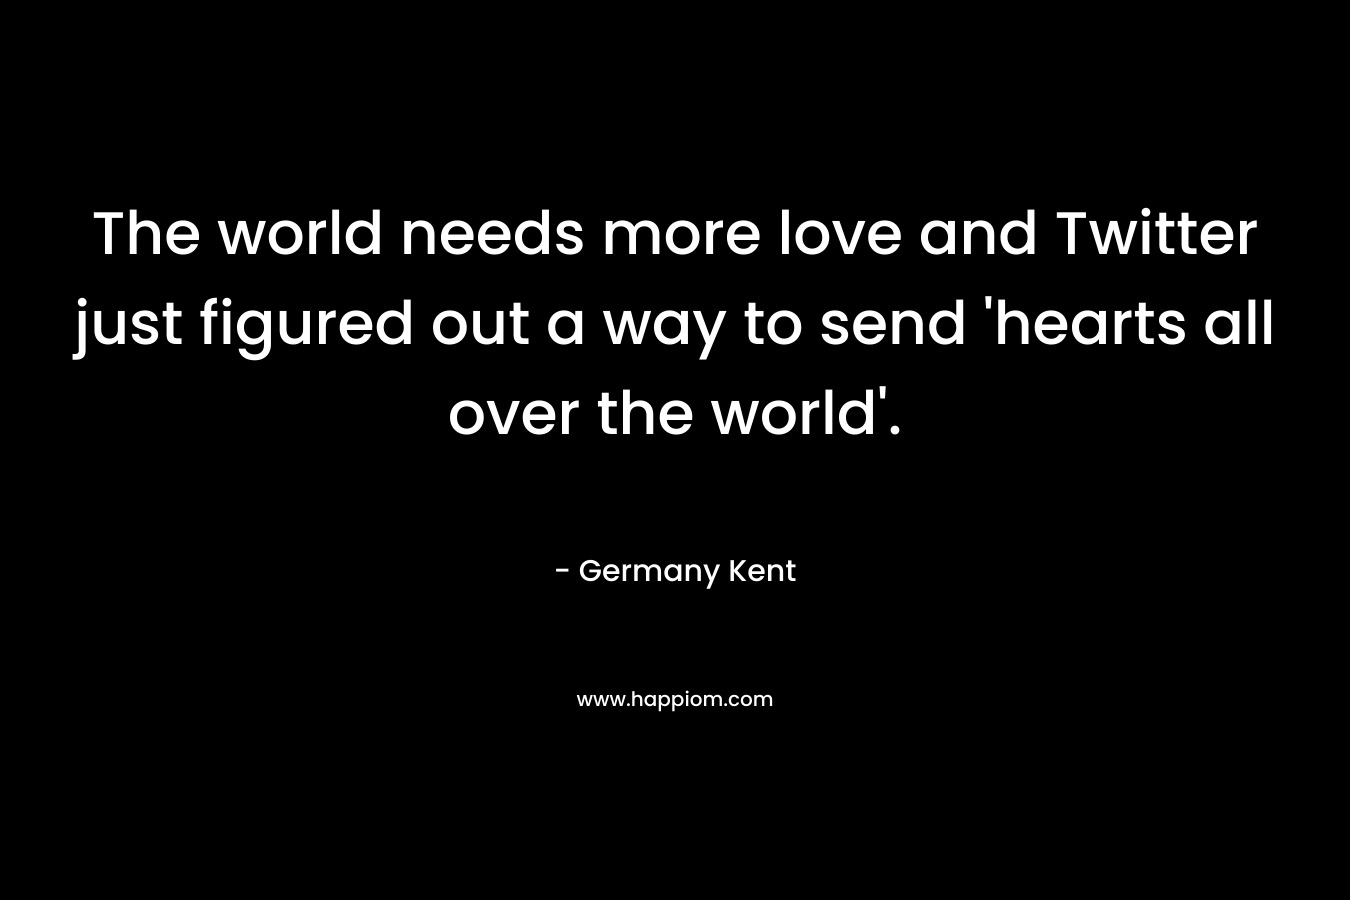 The world needs more love and Twitter just figured out a way to send 'hearts all over the world'.